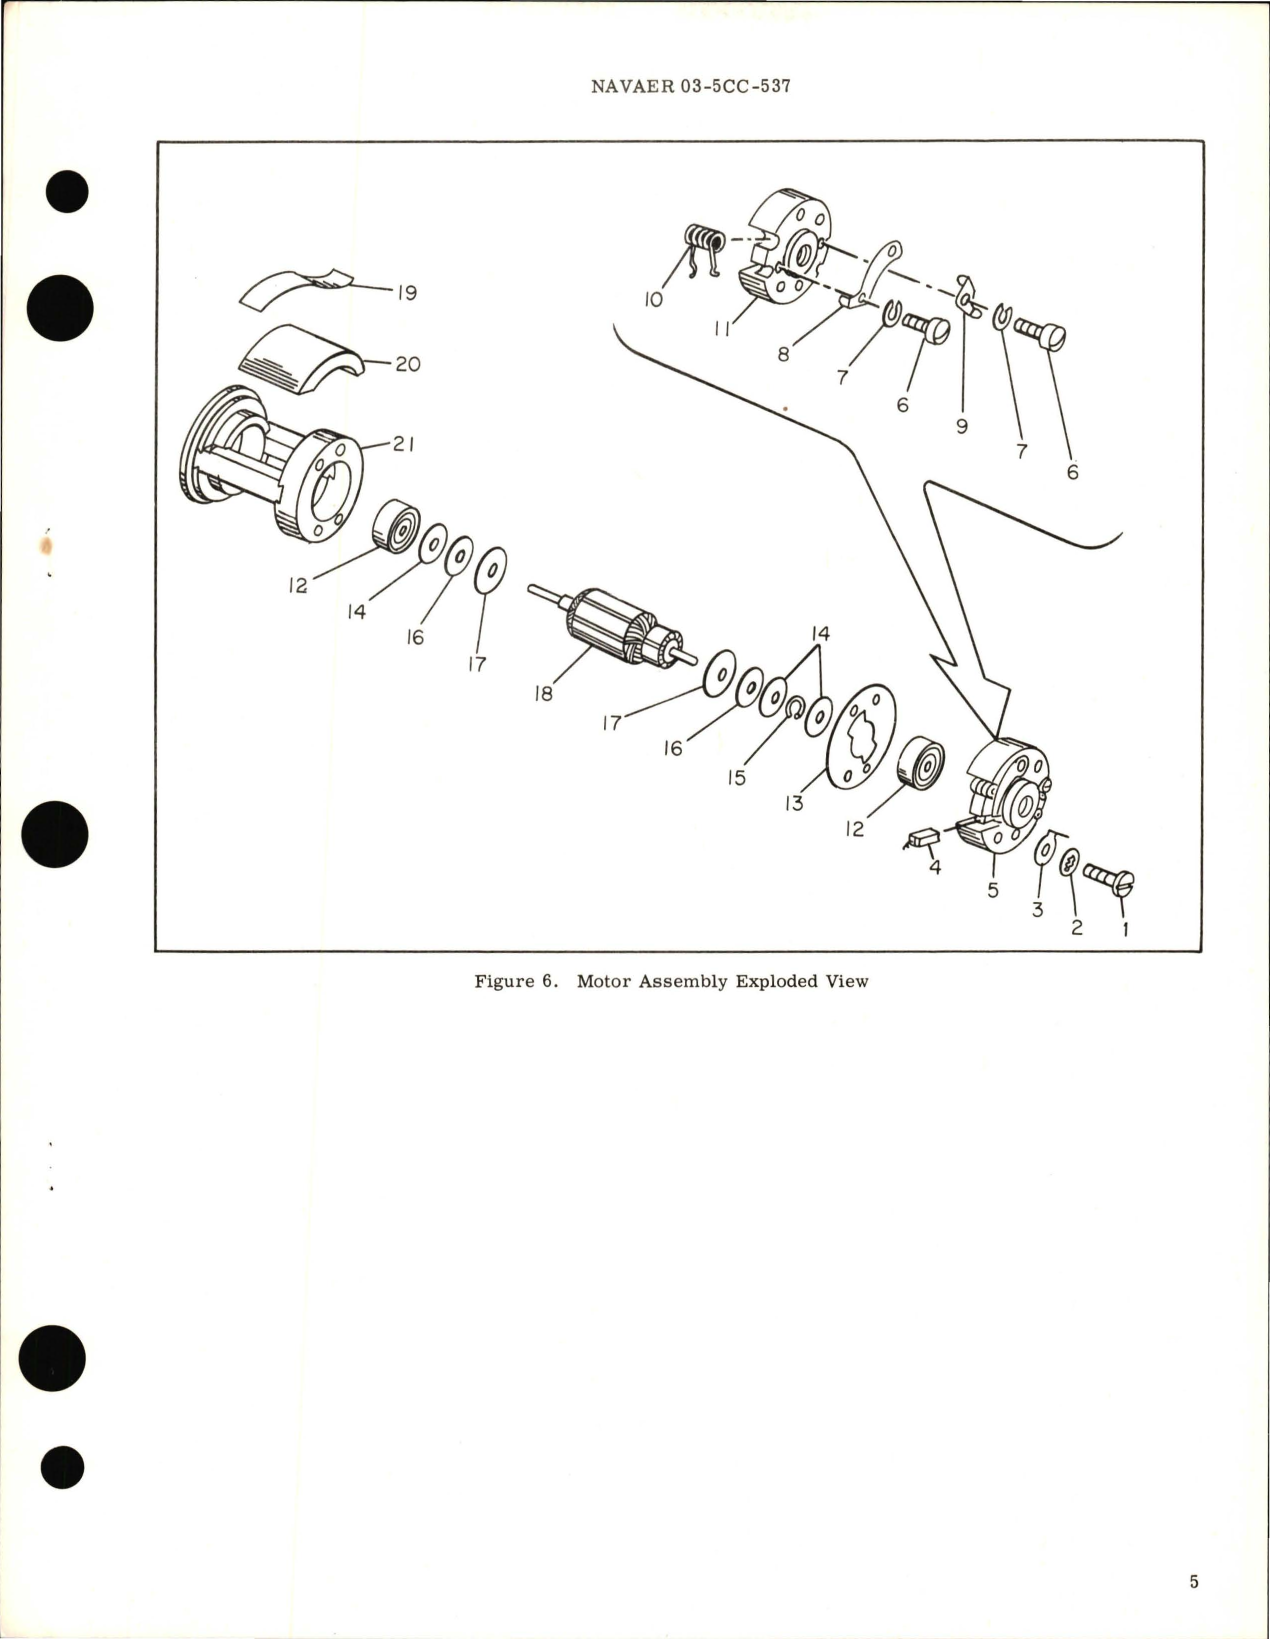 Sample page 5 from AirCorps Library document: Overhaul Instructions with Parts Breakdown for Stall Warning Vibrator Actuator - Part C-3A-806, C-35A-503 and 35A505 